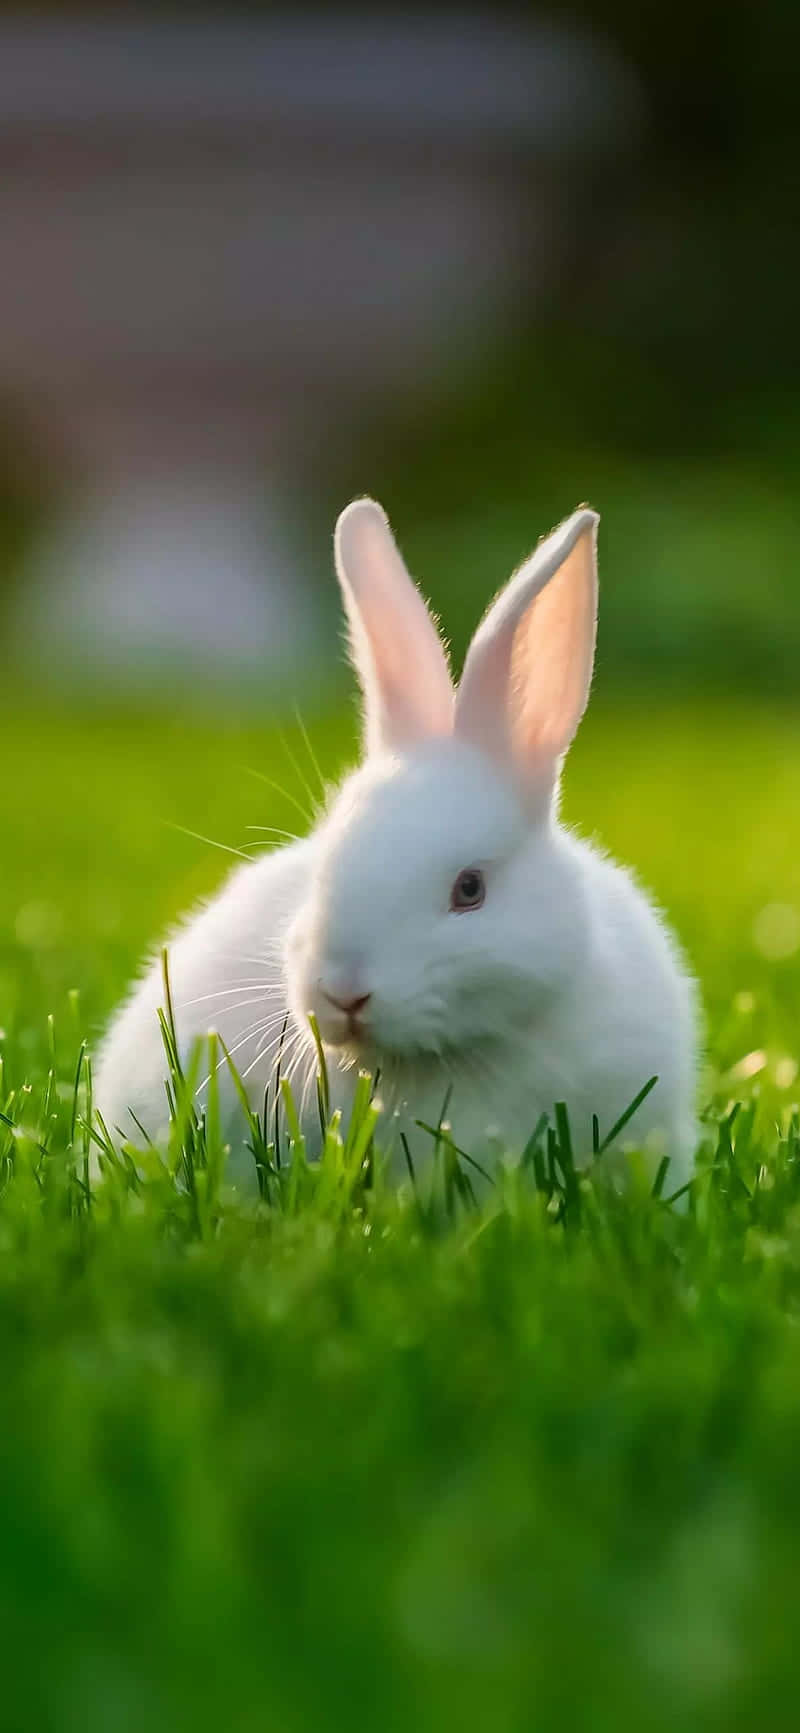 Enjoy This Cute Bunny with your iPhone Wallpaper